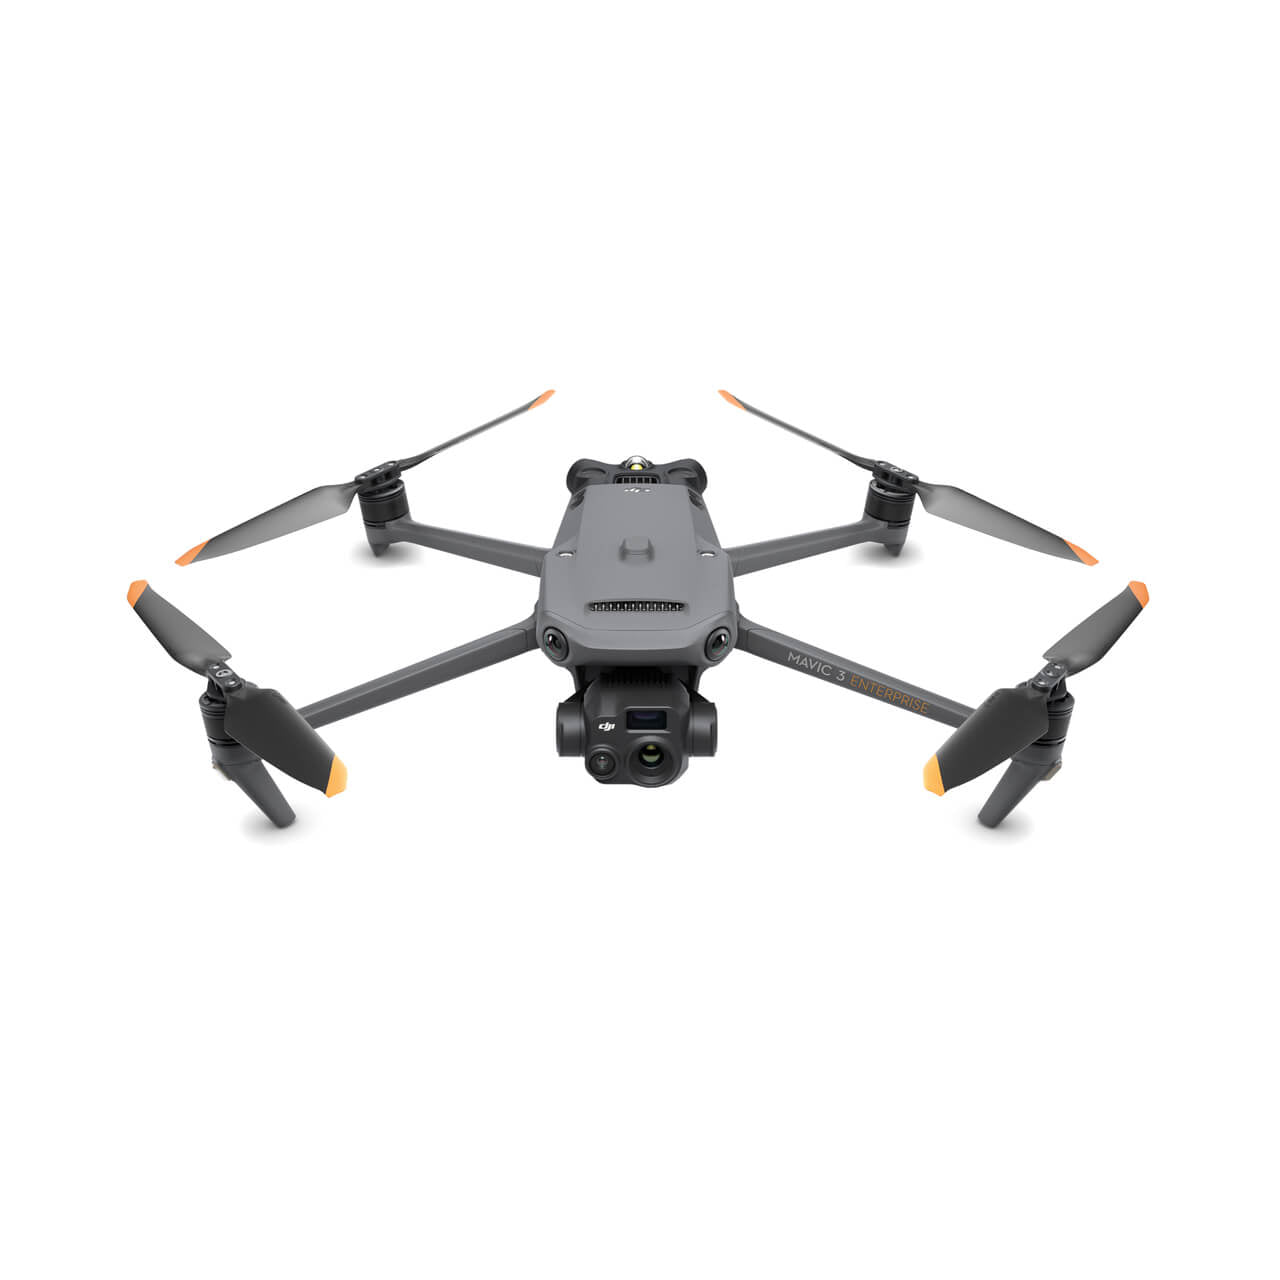 Black Falcon Drone Reviews - Cheap 4K Flying Drone or Really Worth Buying?